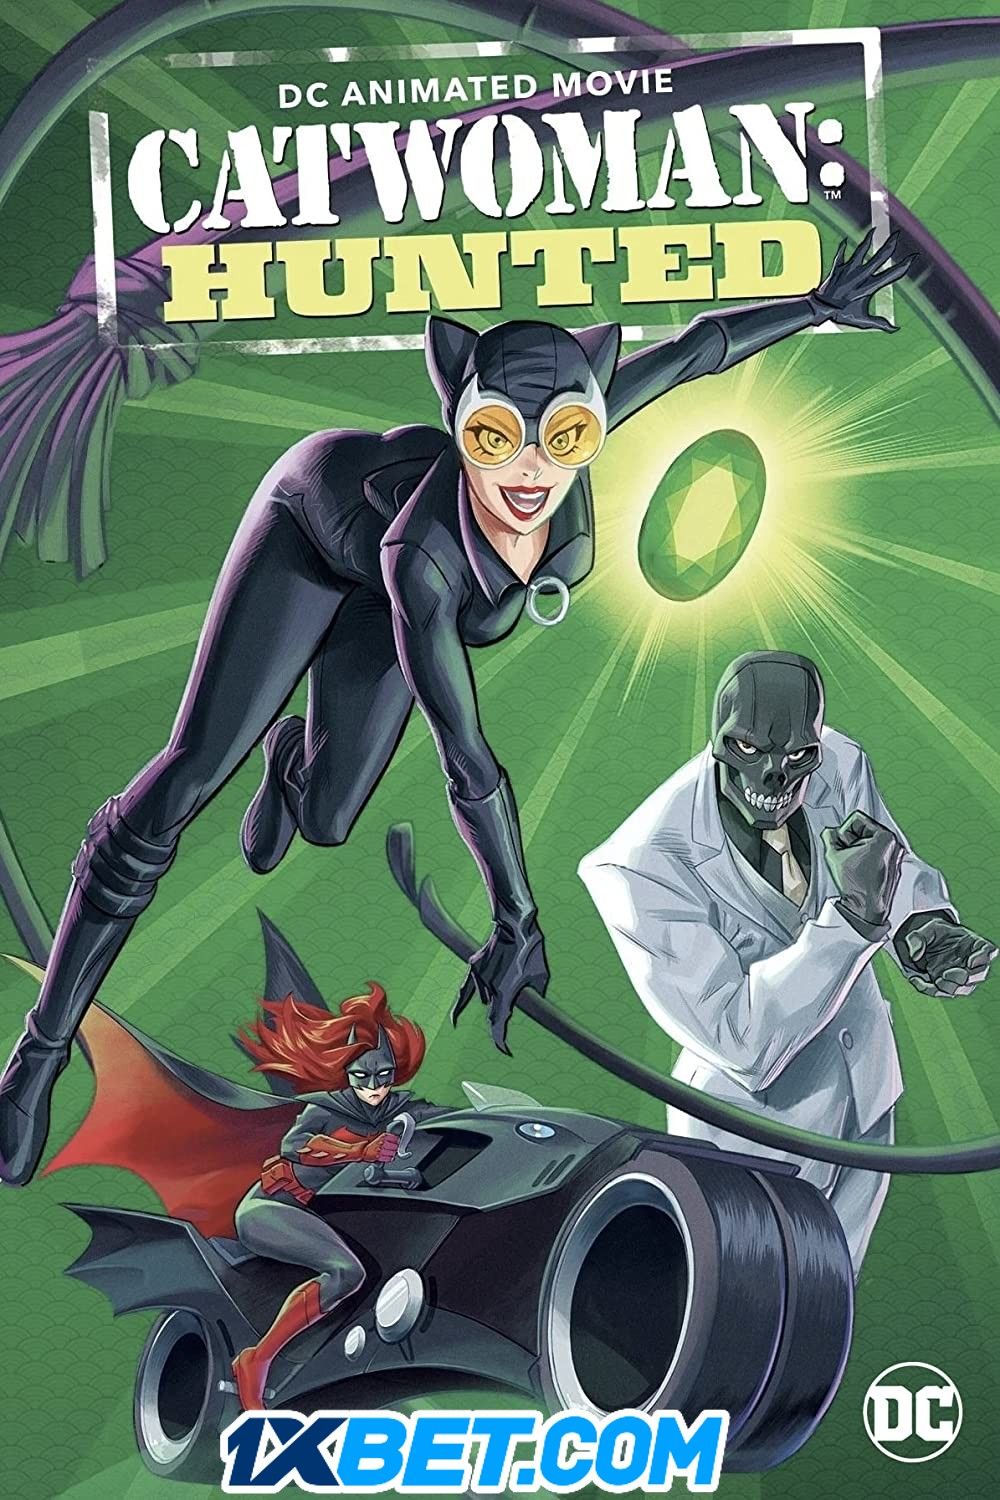 Catwoman: Hunted (2022) Telugu (Voice Over) Dubbed BluRay download full movie